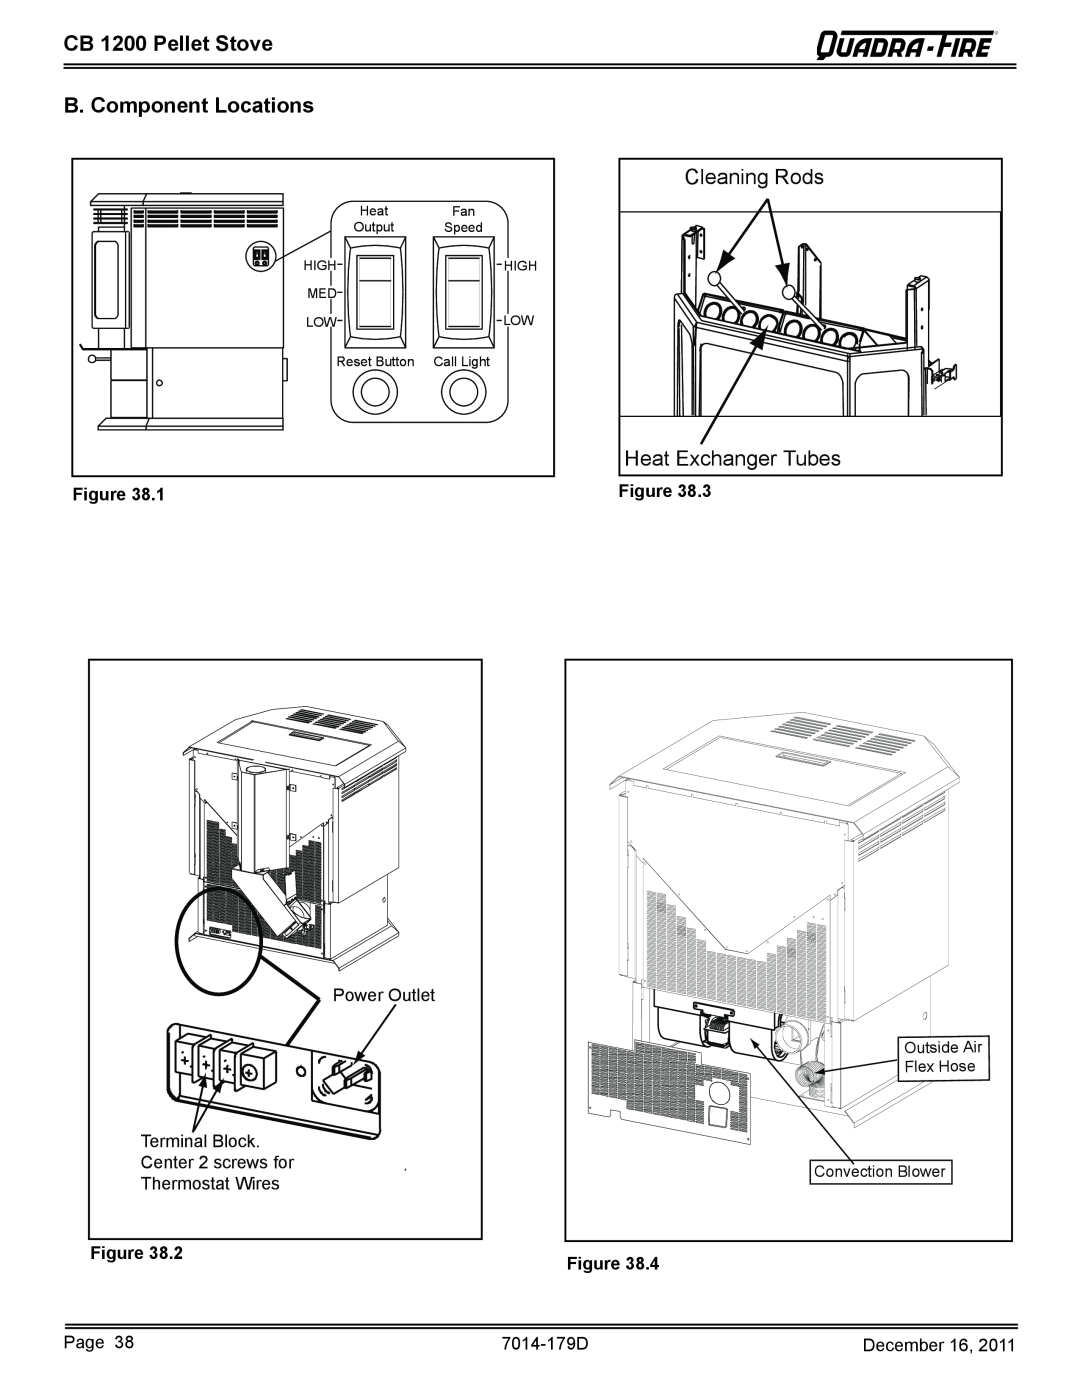 Quadra-Fire CB1200M-MBK owner manual CB 1200 Pellet Stove B. Component Locations, Cleaning Rods Heat Exchanger Tubes 